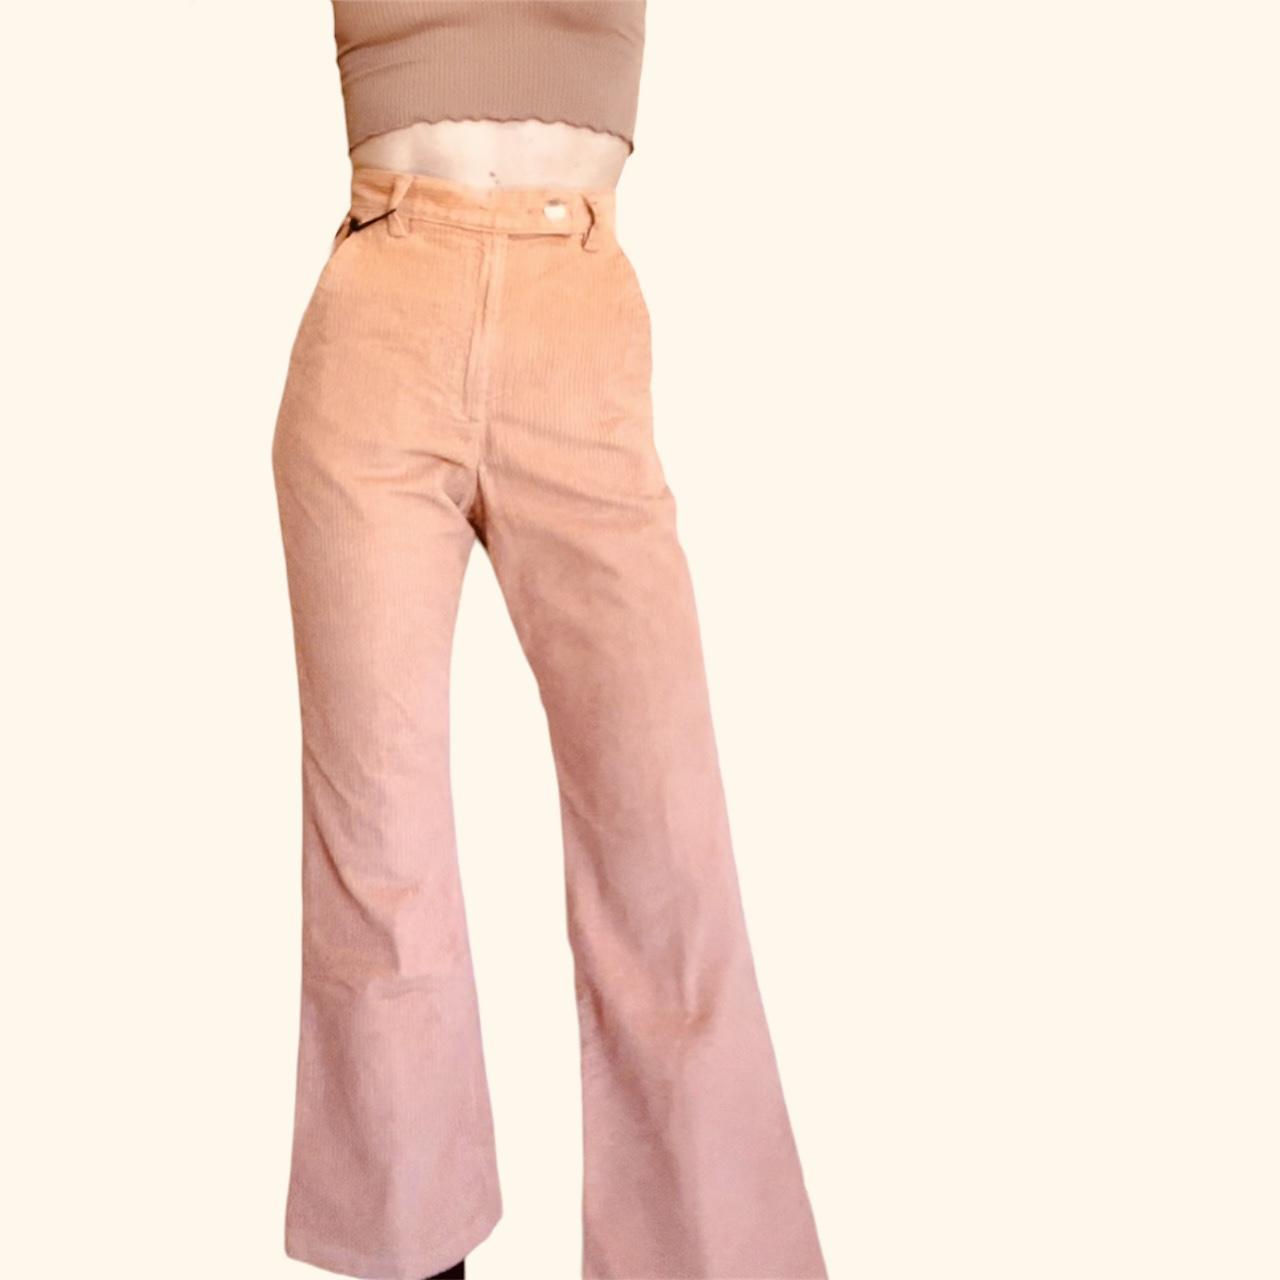 Levi's Women's Pink and Orange Trousers | Depop